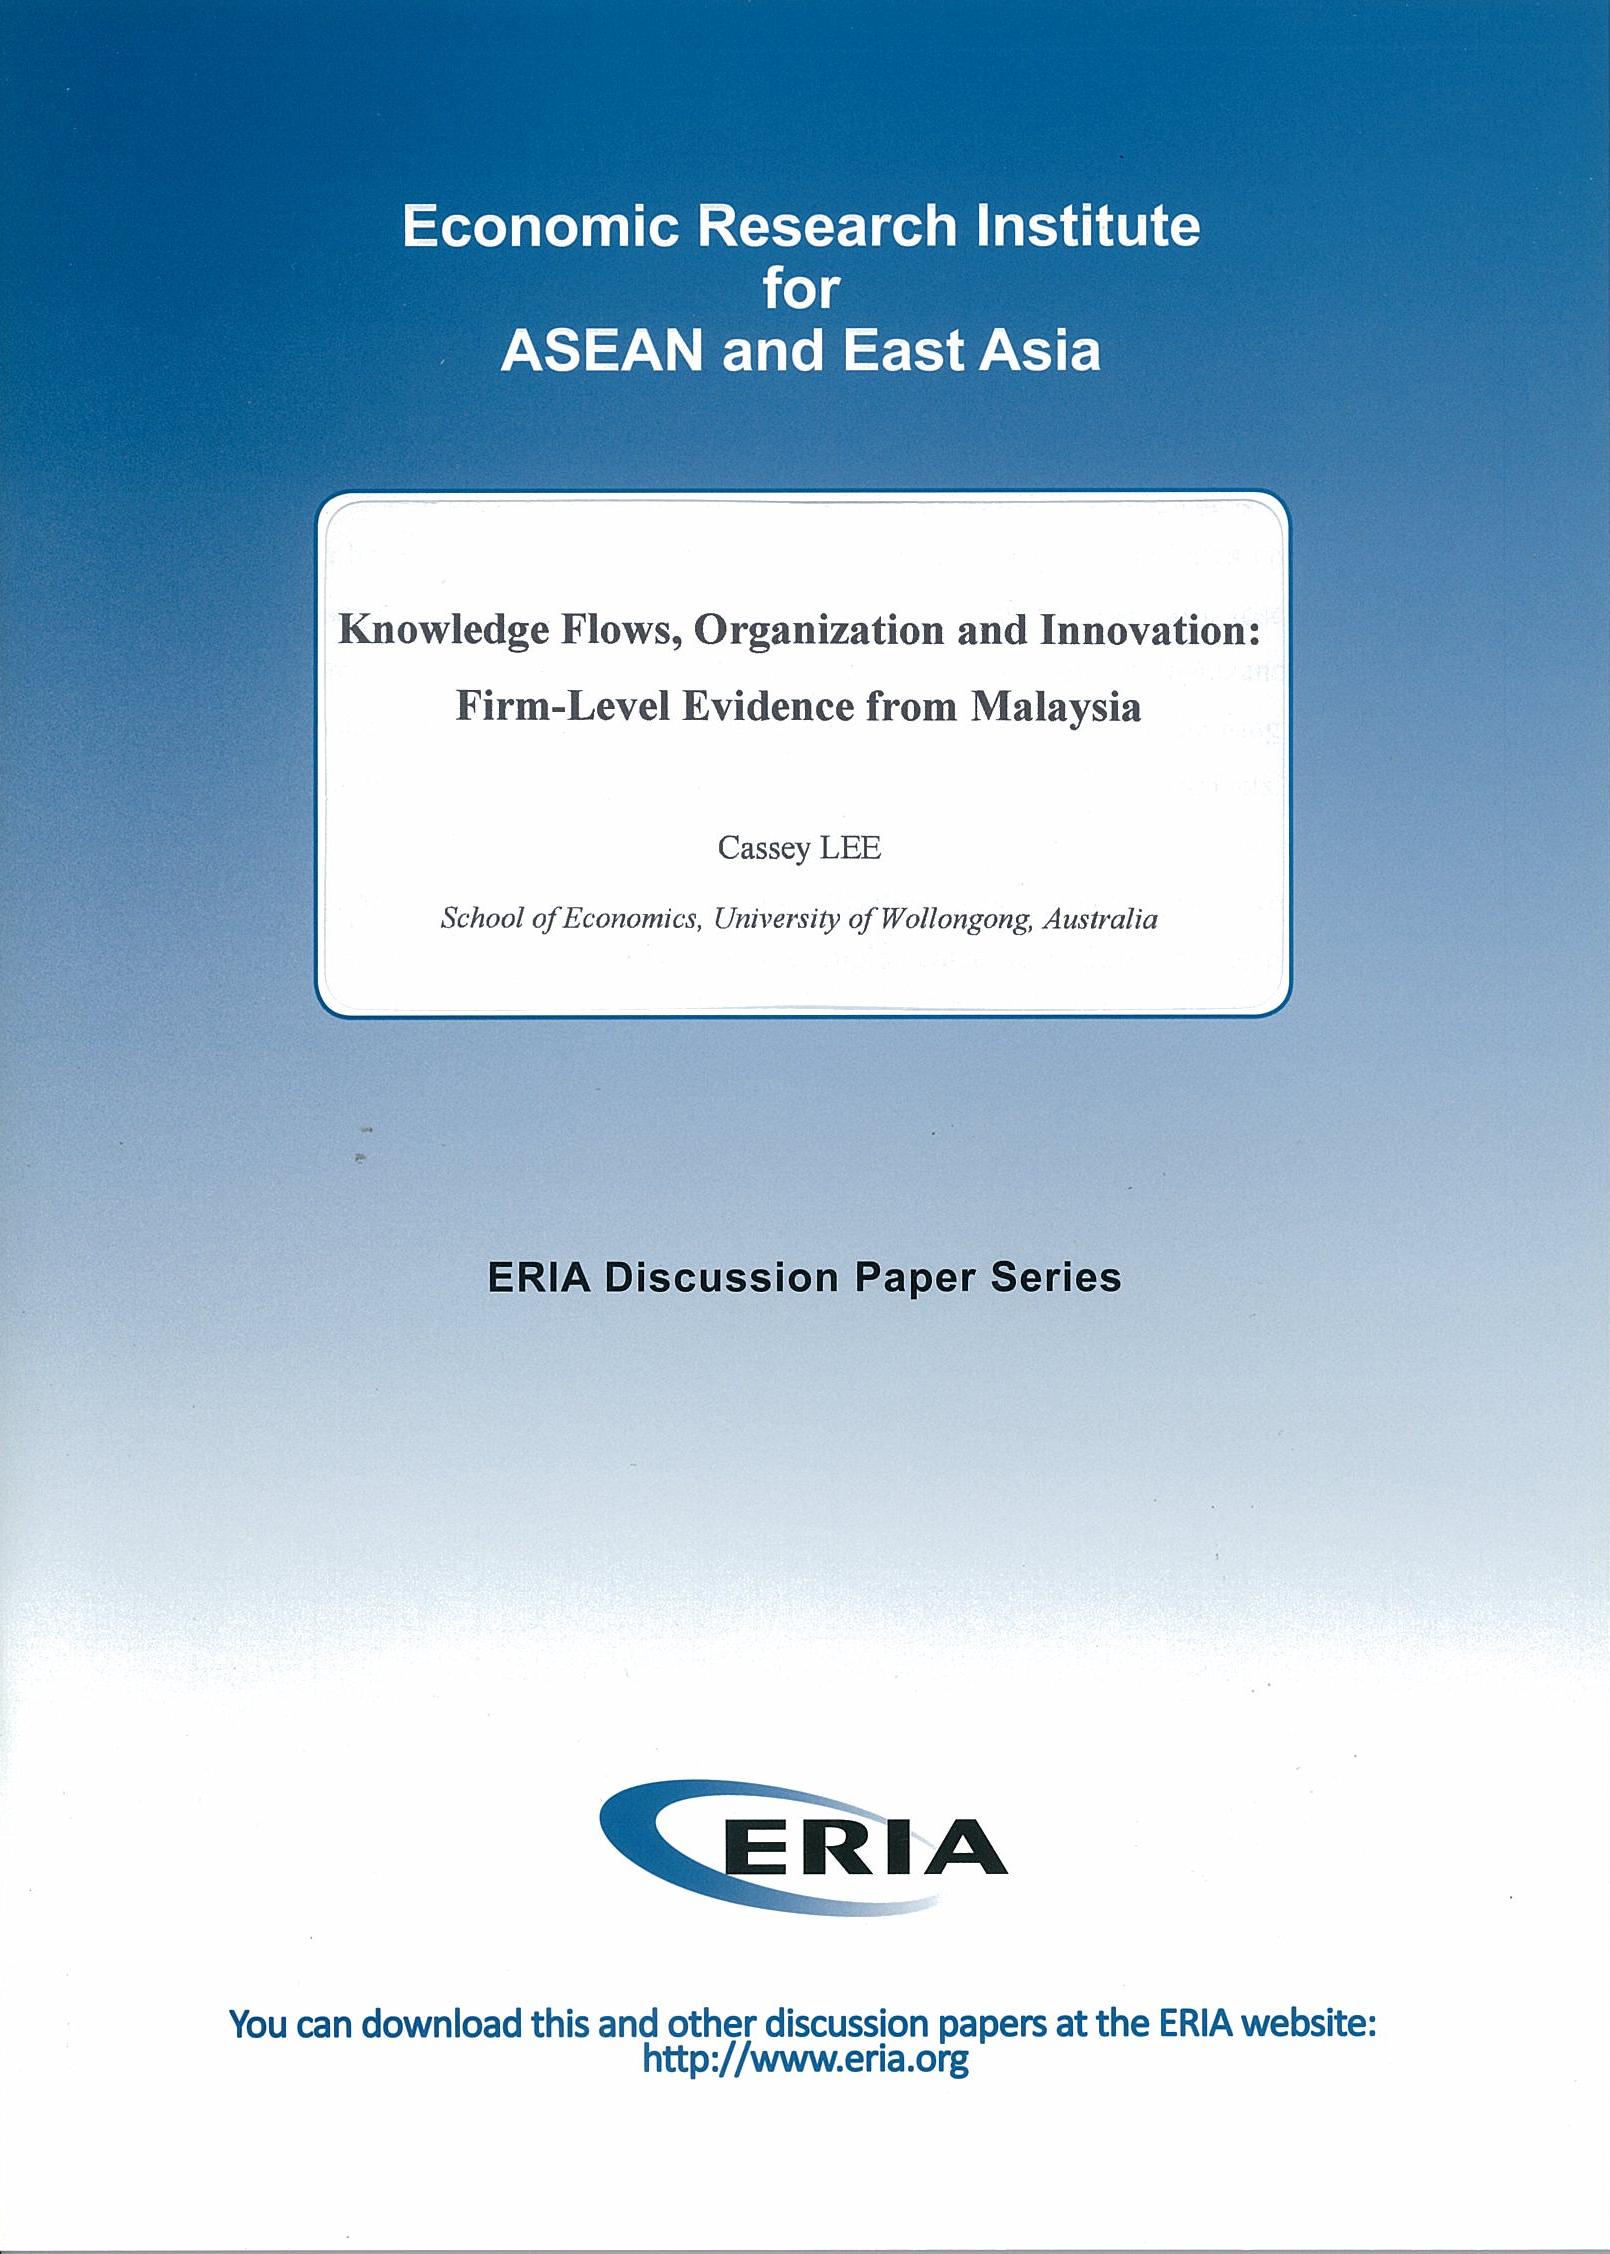 Knowledge Flows, Organization and Innovation: Firm-Level Evidence from Malaysia